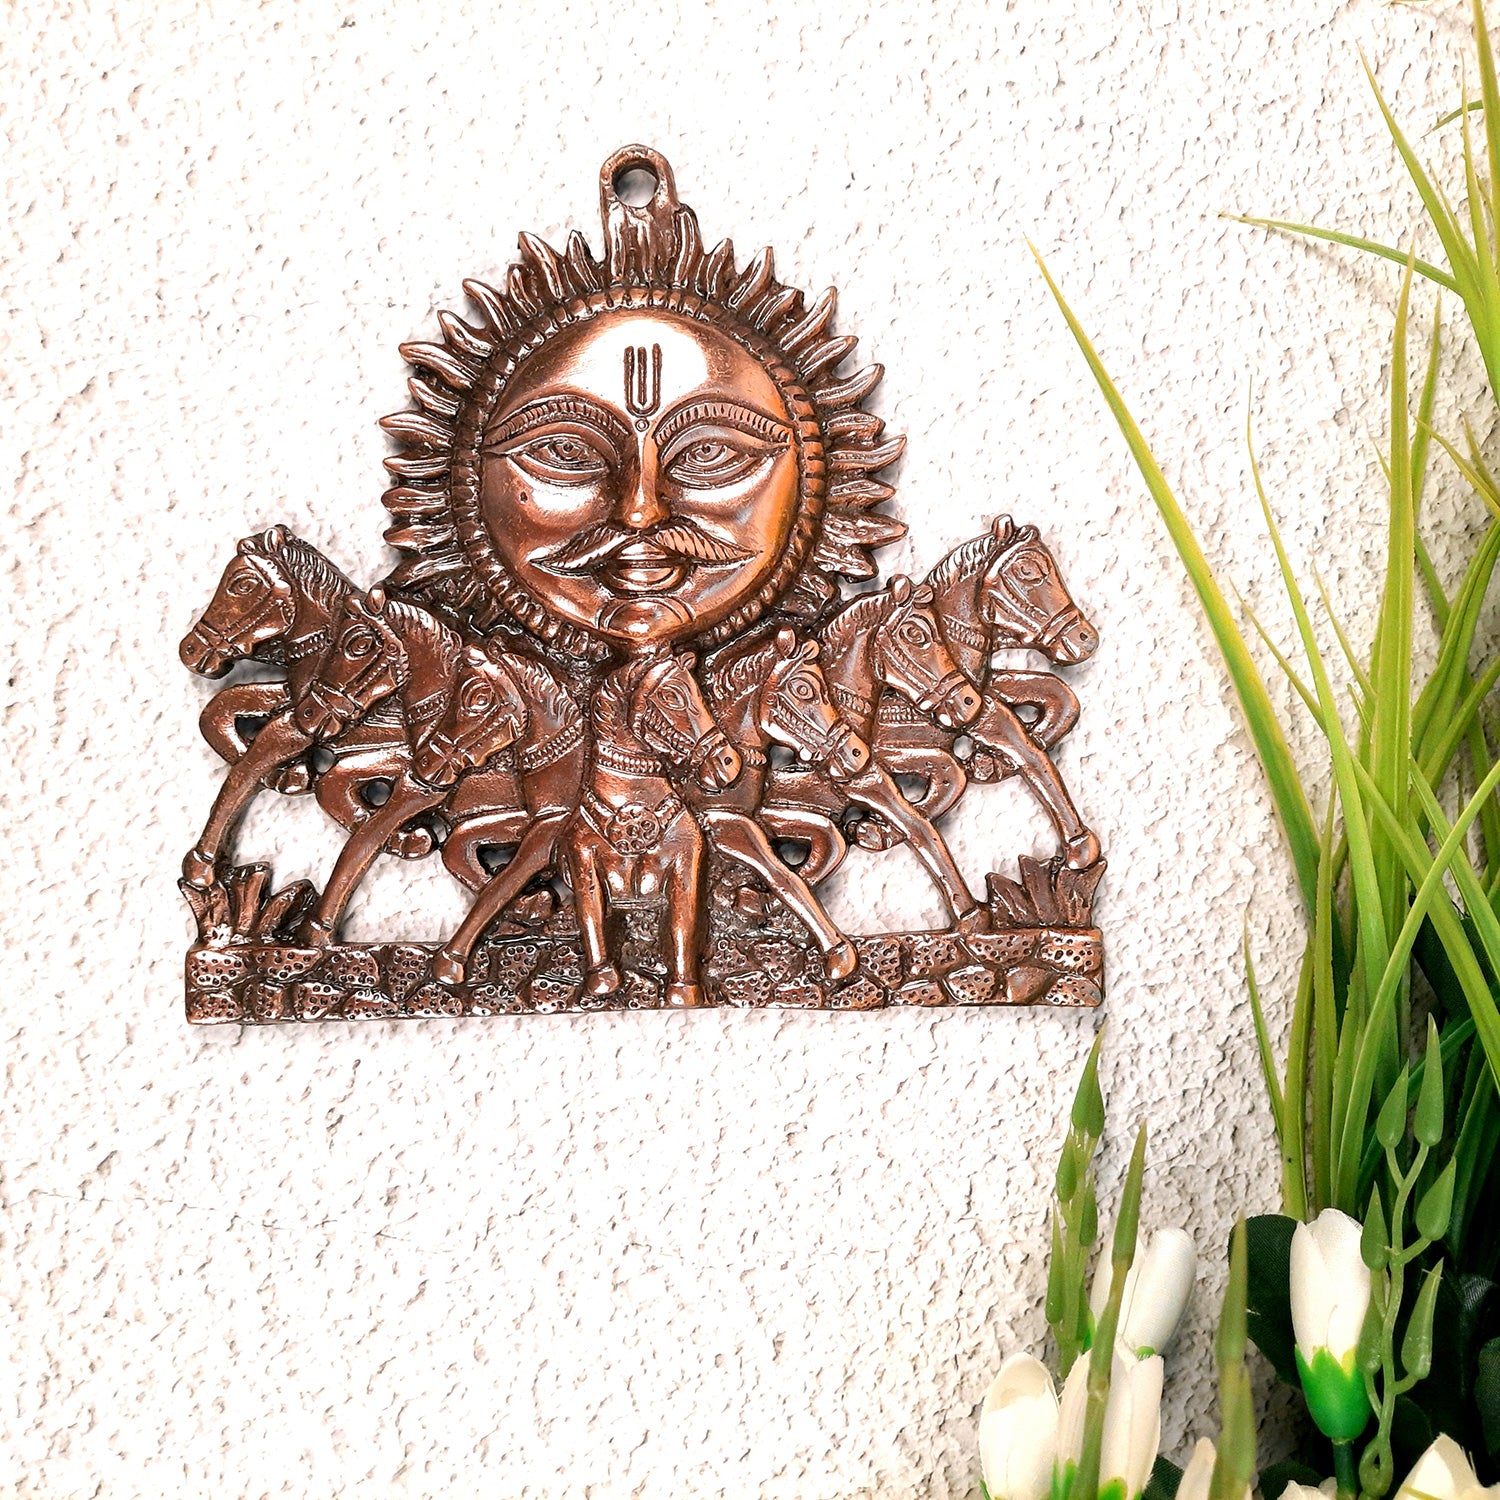 Sun God with Seven Running Horses Wall Hanging | Surya Bhagwan With 7 Horse Wall Art - for Vastu, Home, Living Room, Entrance & Gift - 8 Inch - Apkamart